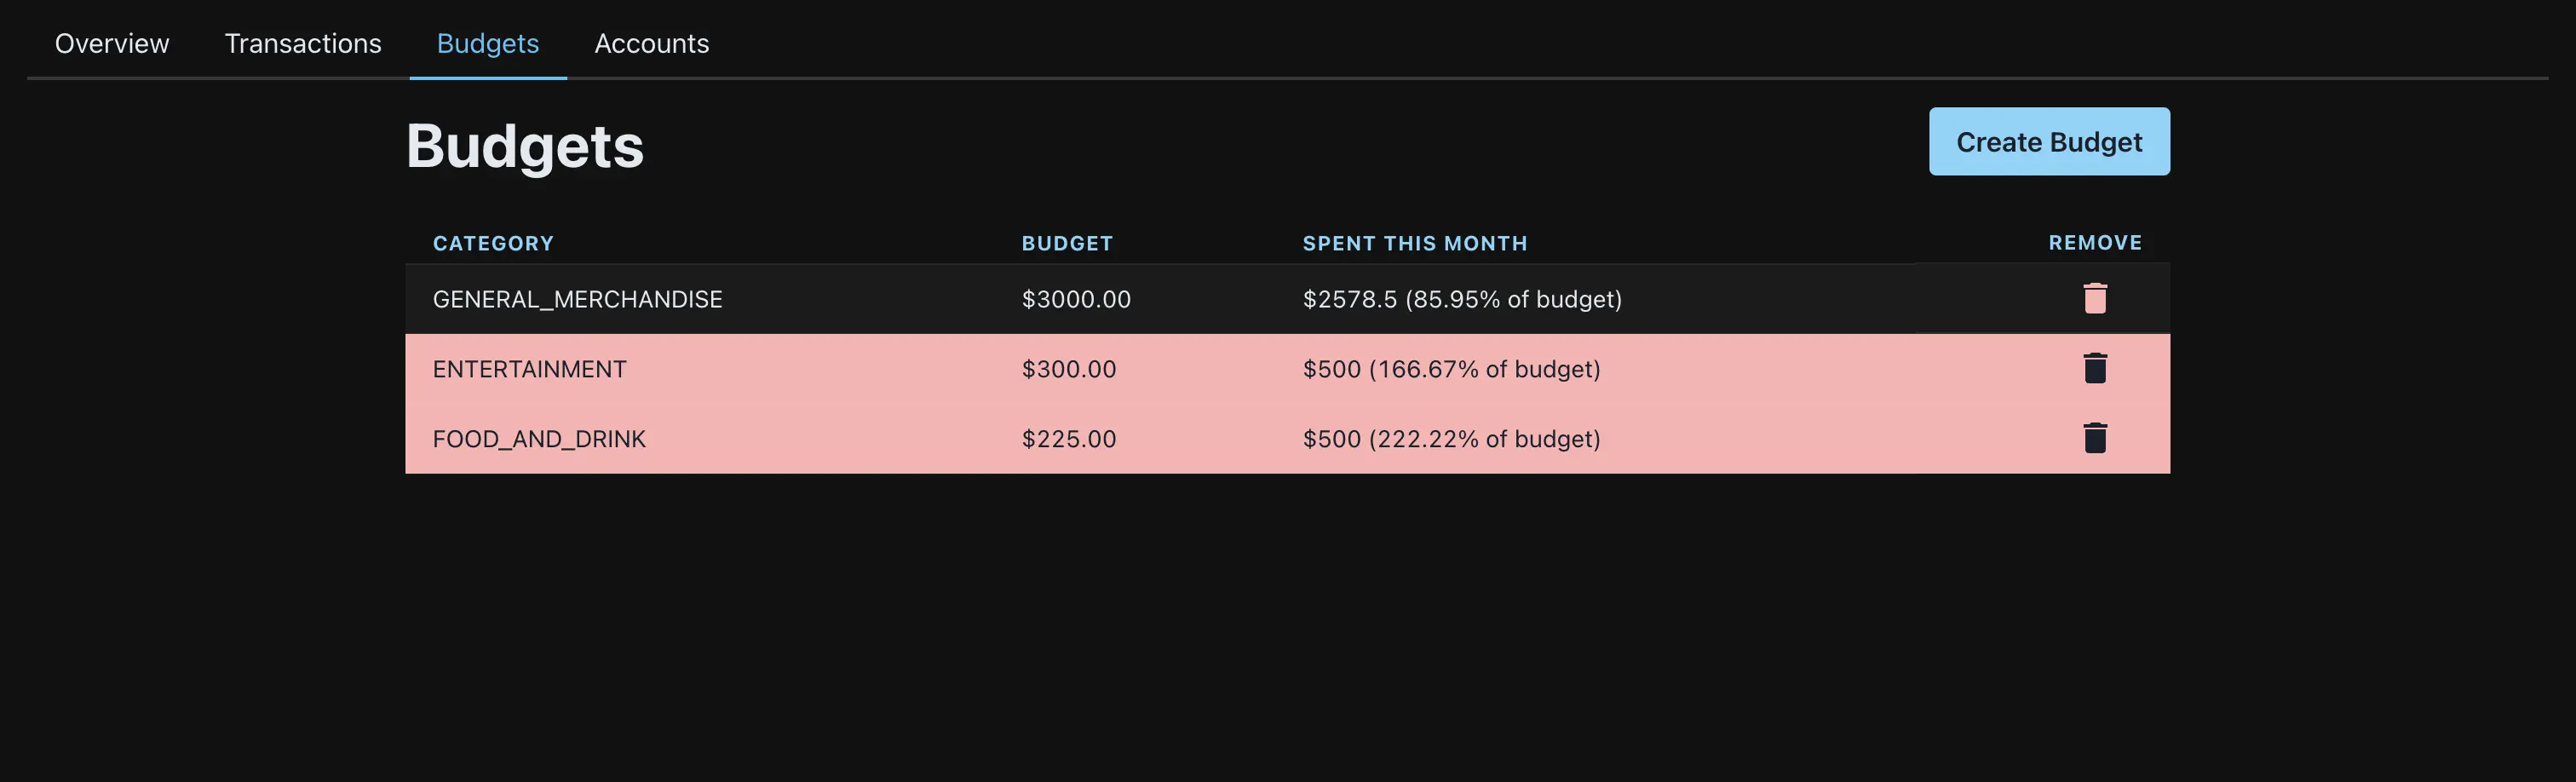 Loocent's financial management dashboard